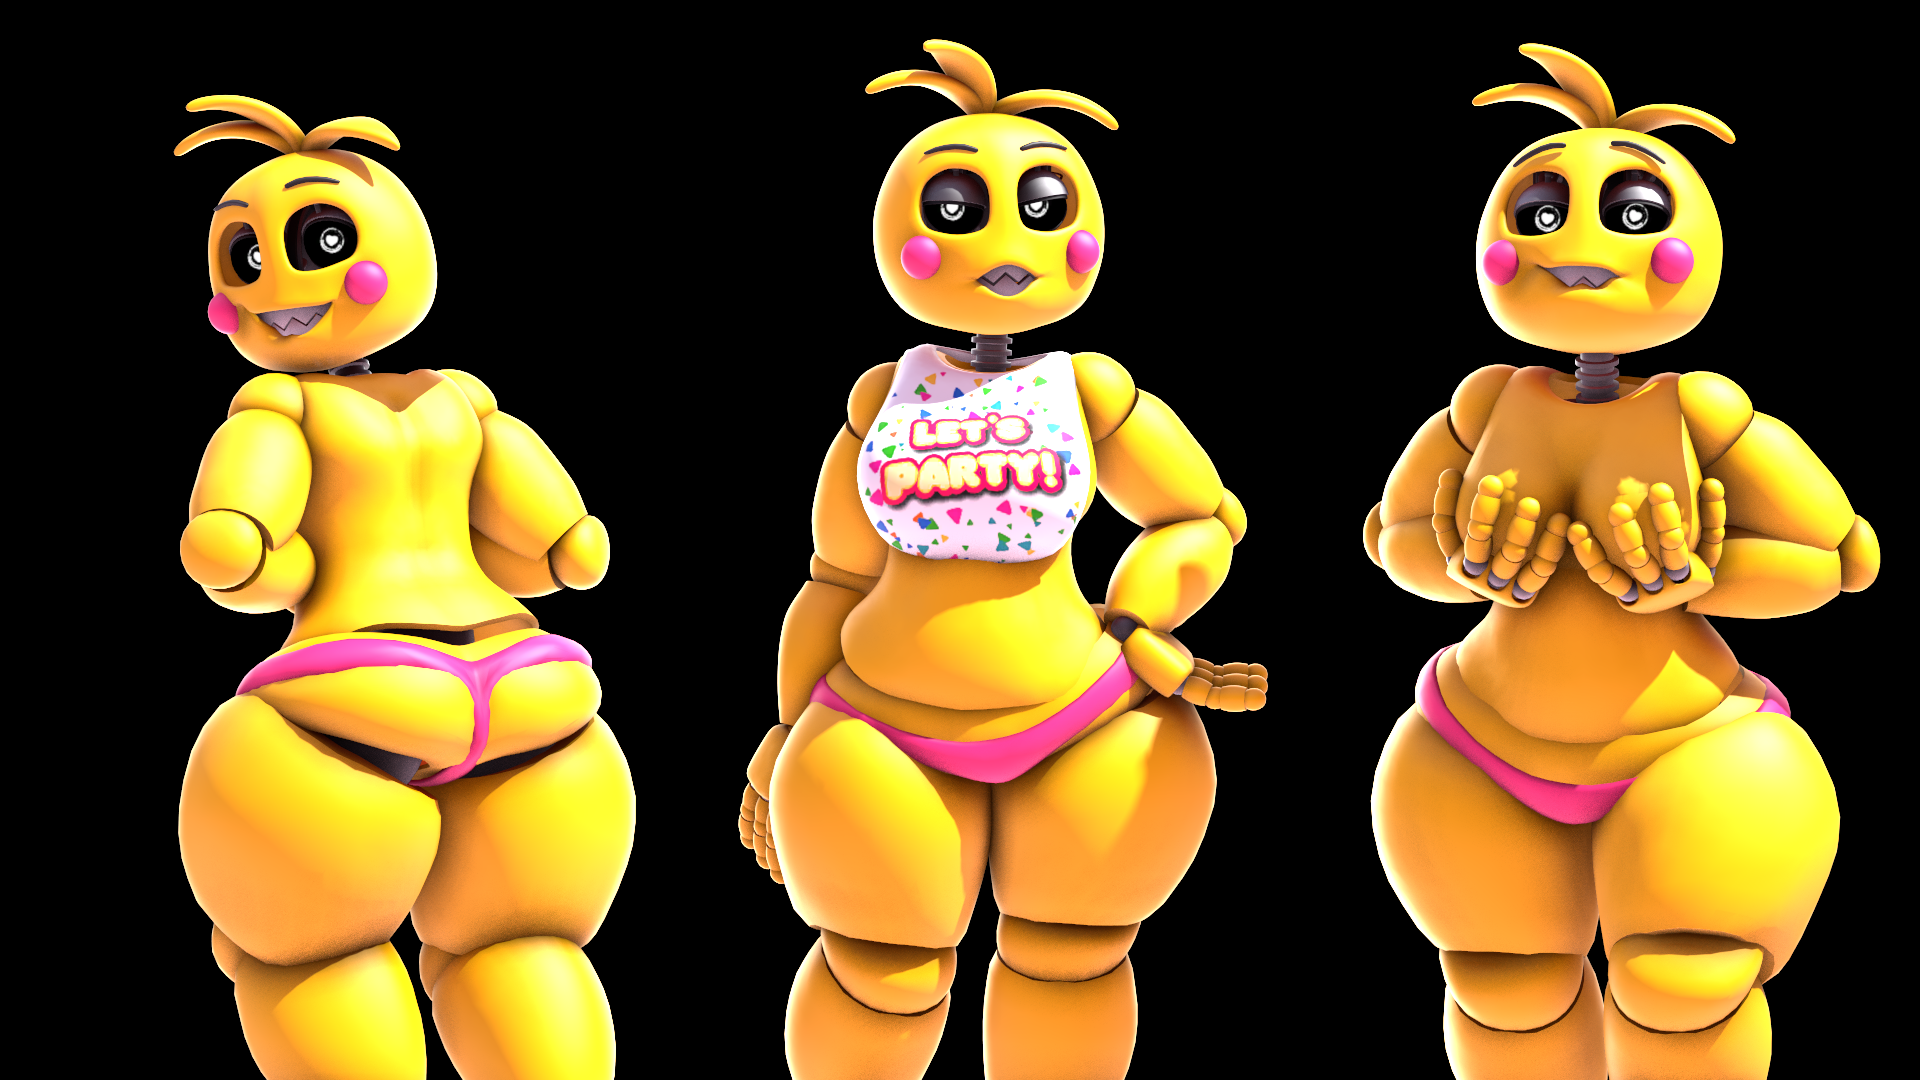 Fnaf toy chica nsfw